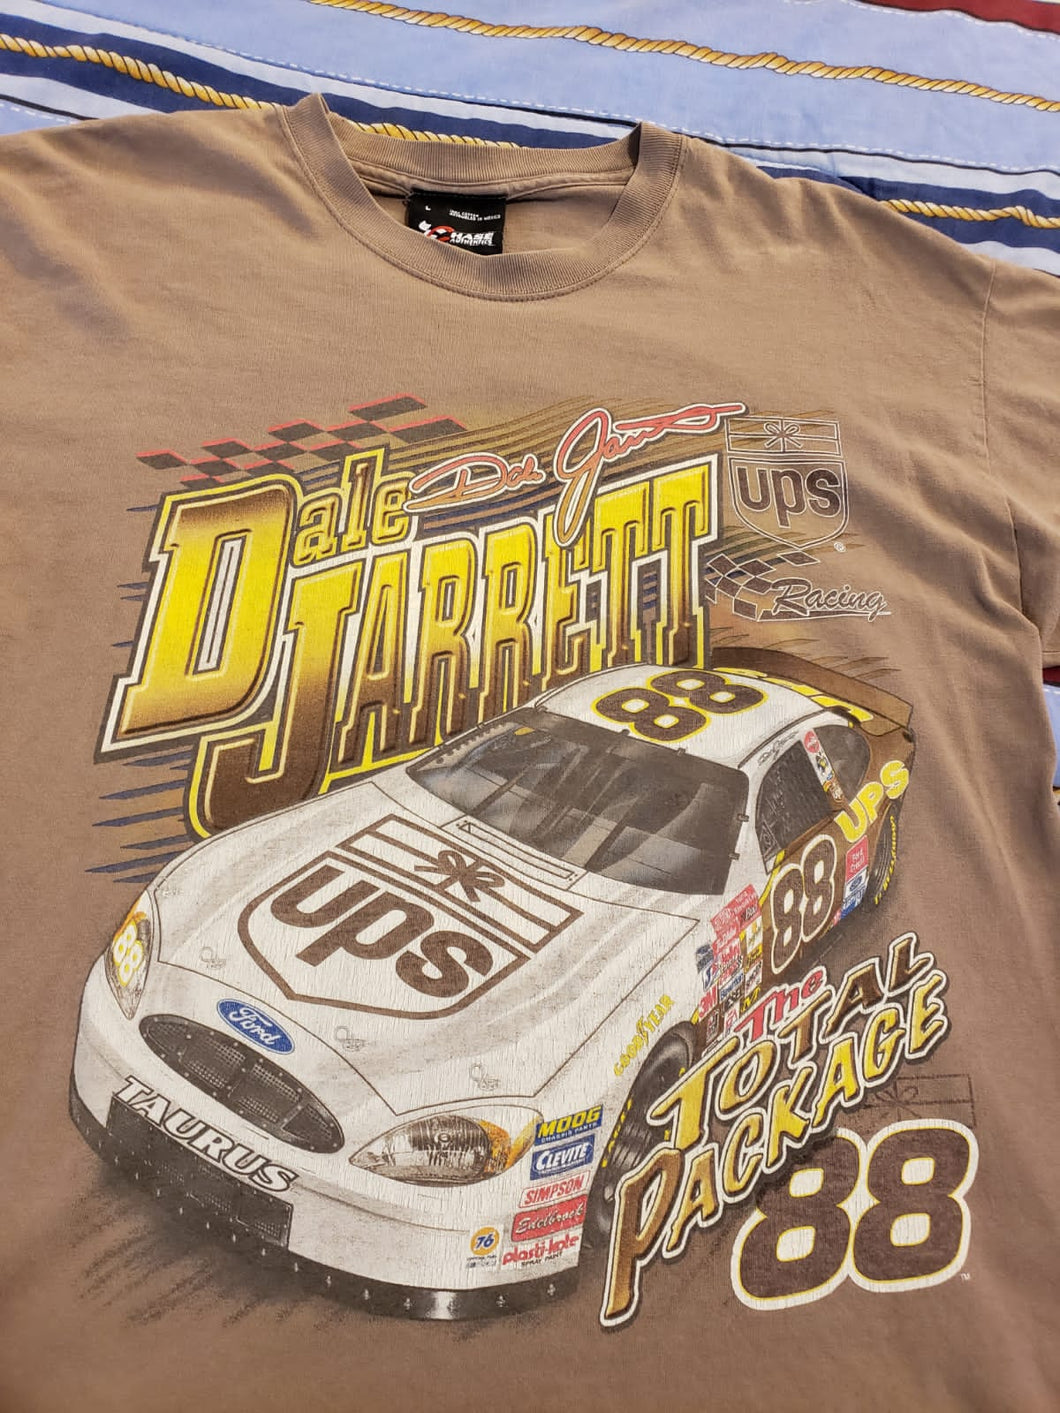 Chase Authentics Dale Jarrett Total Package UPS Racing Dual sided Vintage Short sleeve T-shirt Size Large $200